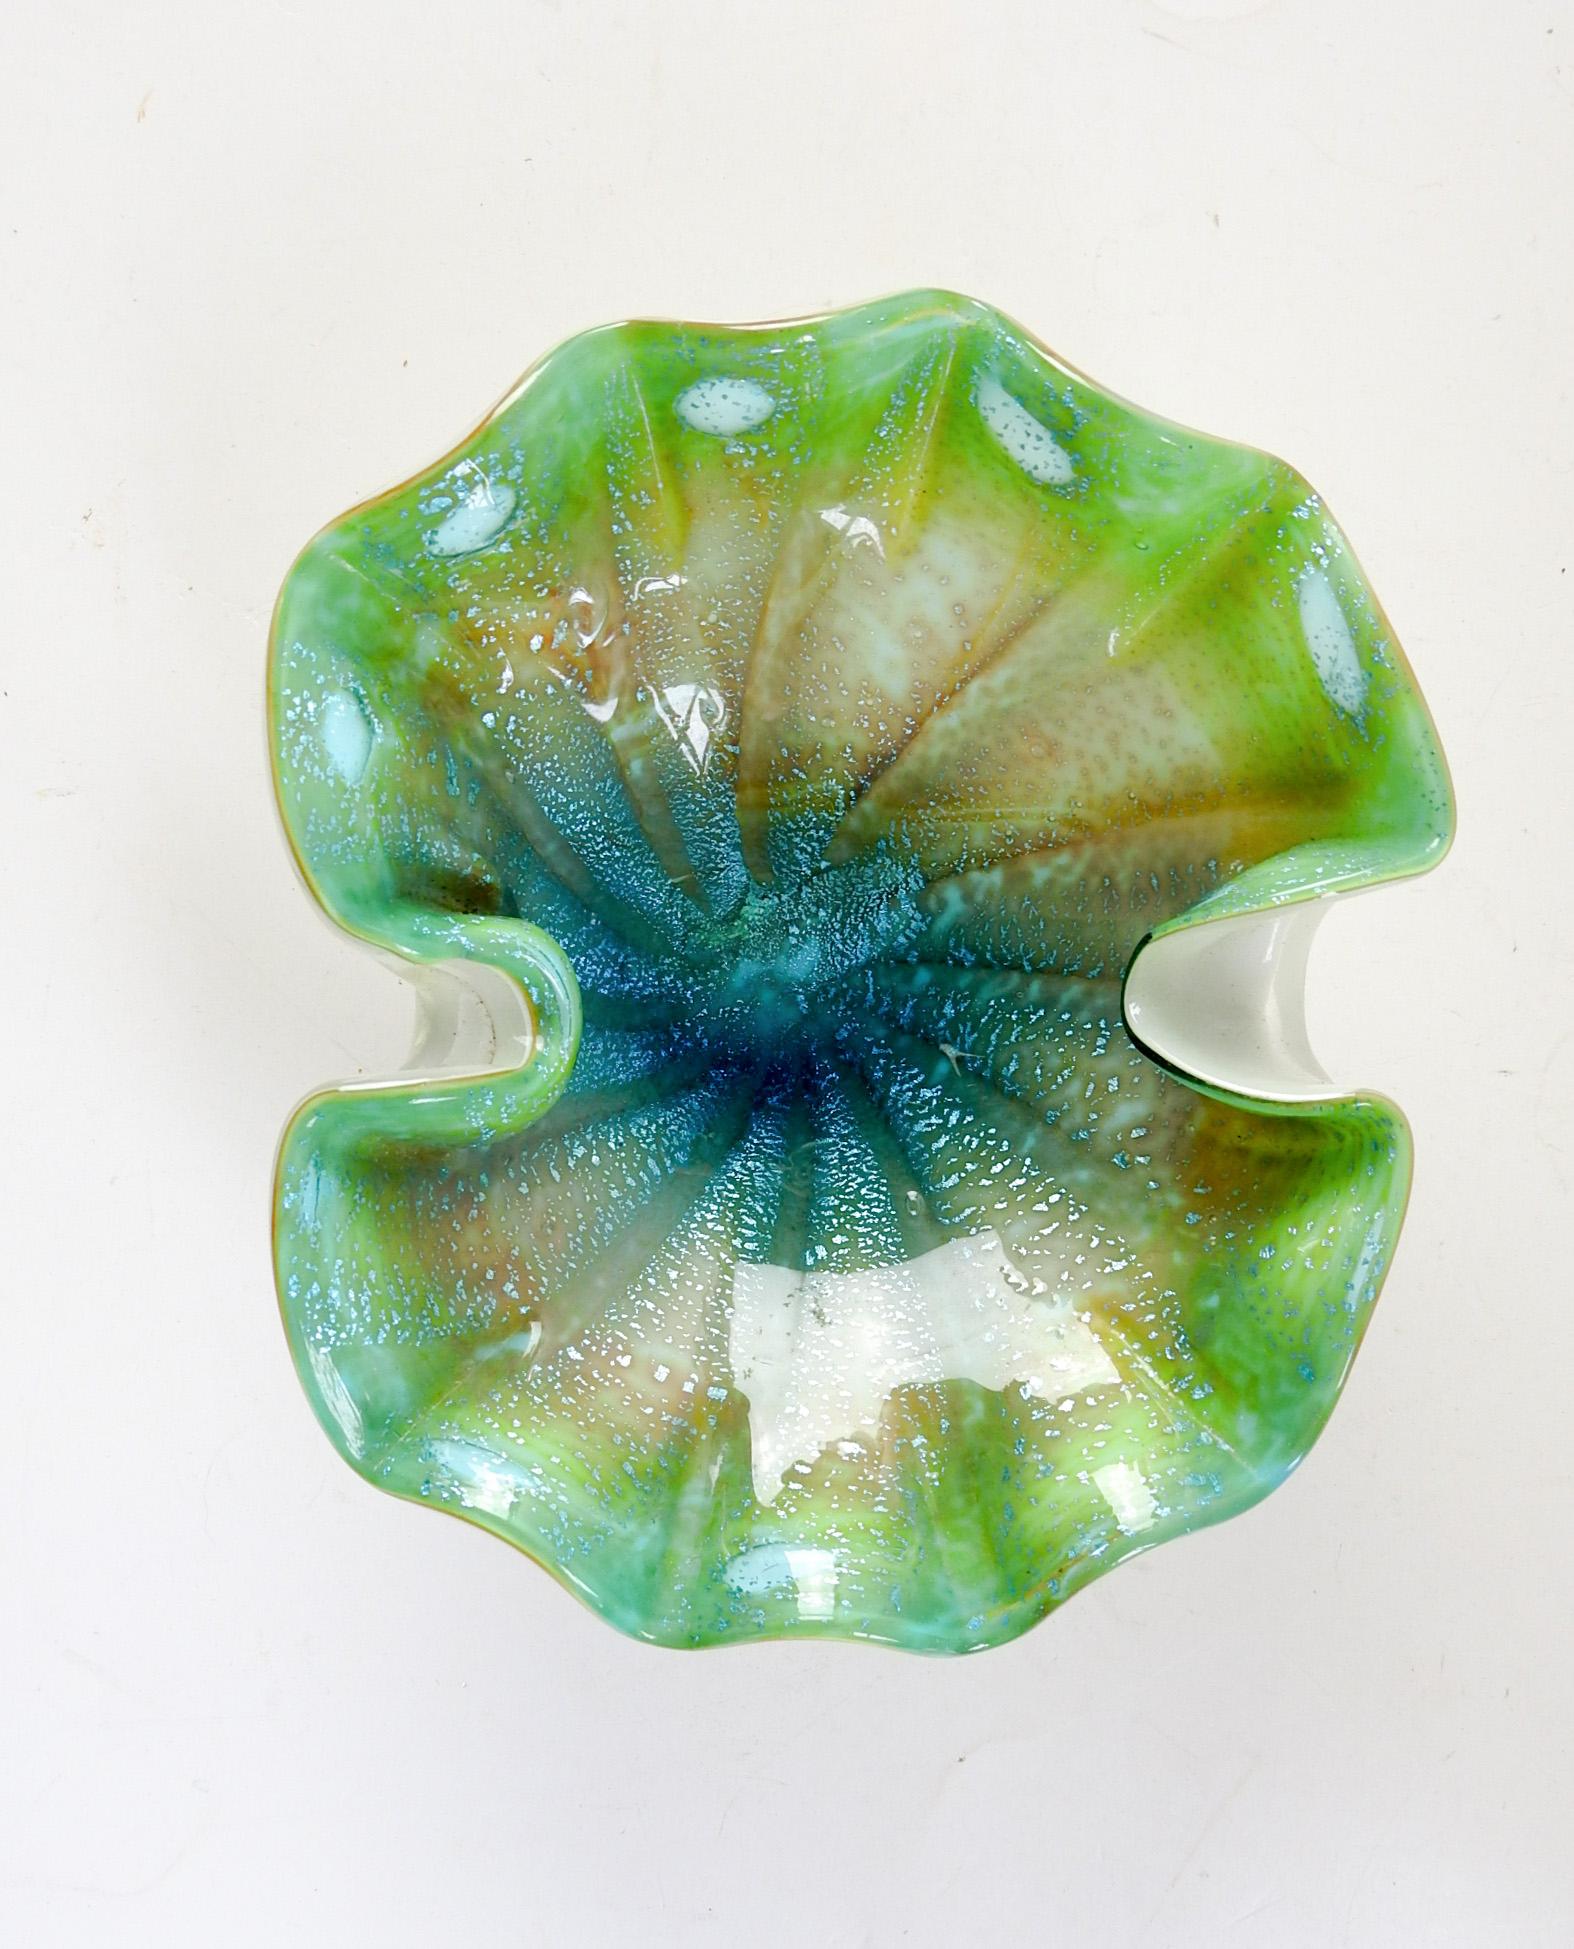 Turquoise and green with white ruffled Murano glass bowl.  Metallic flecks imbeded for some added sparkle.